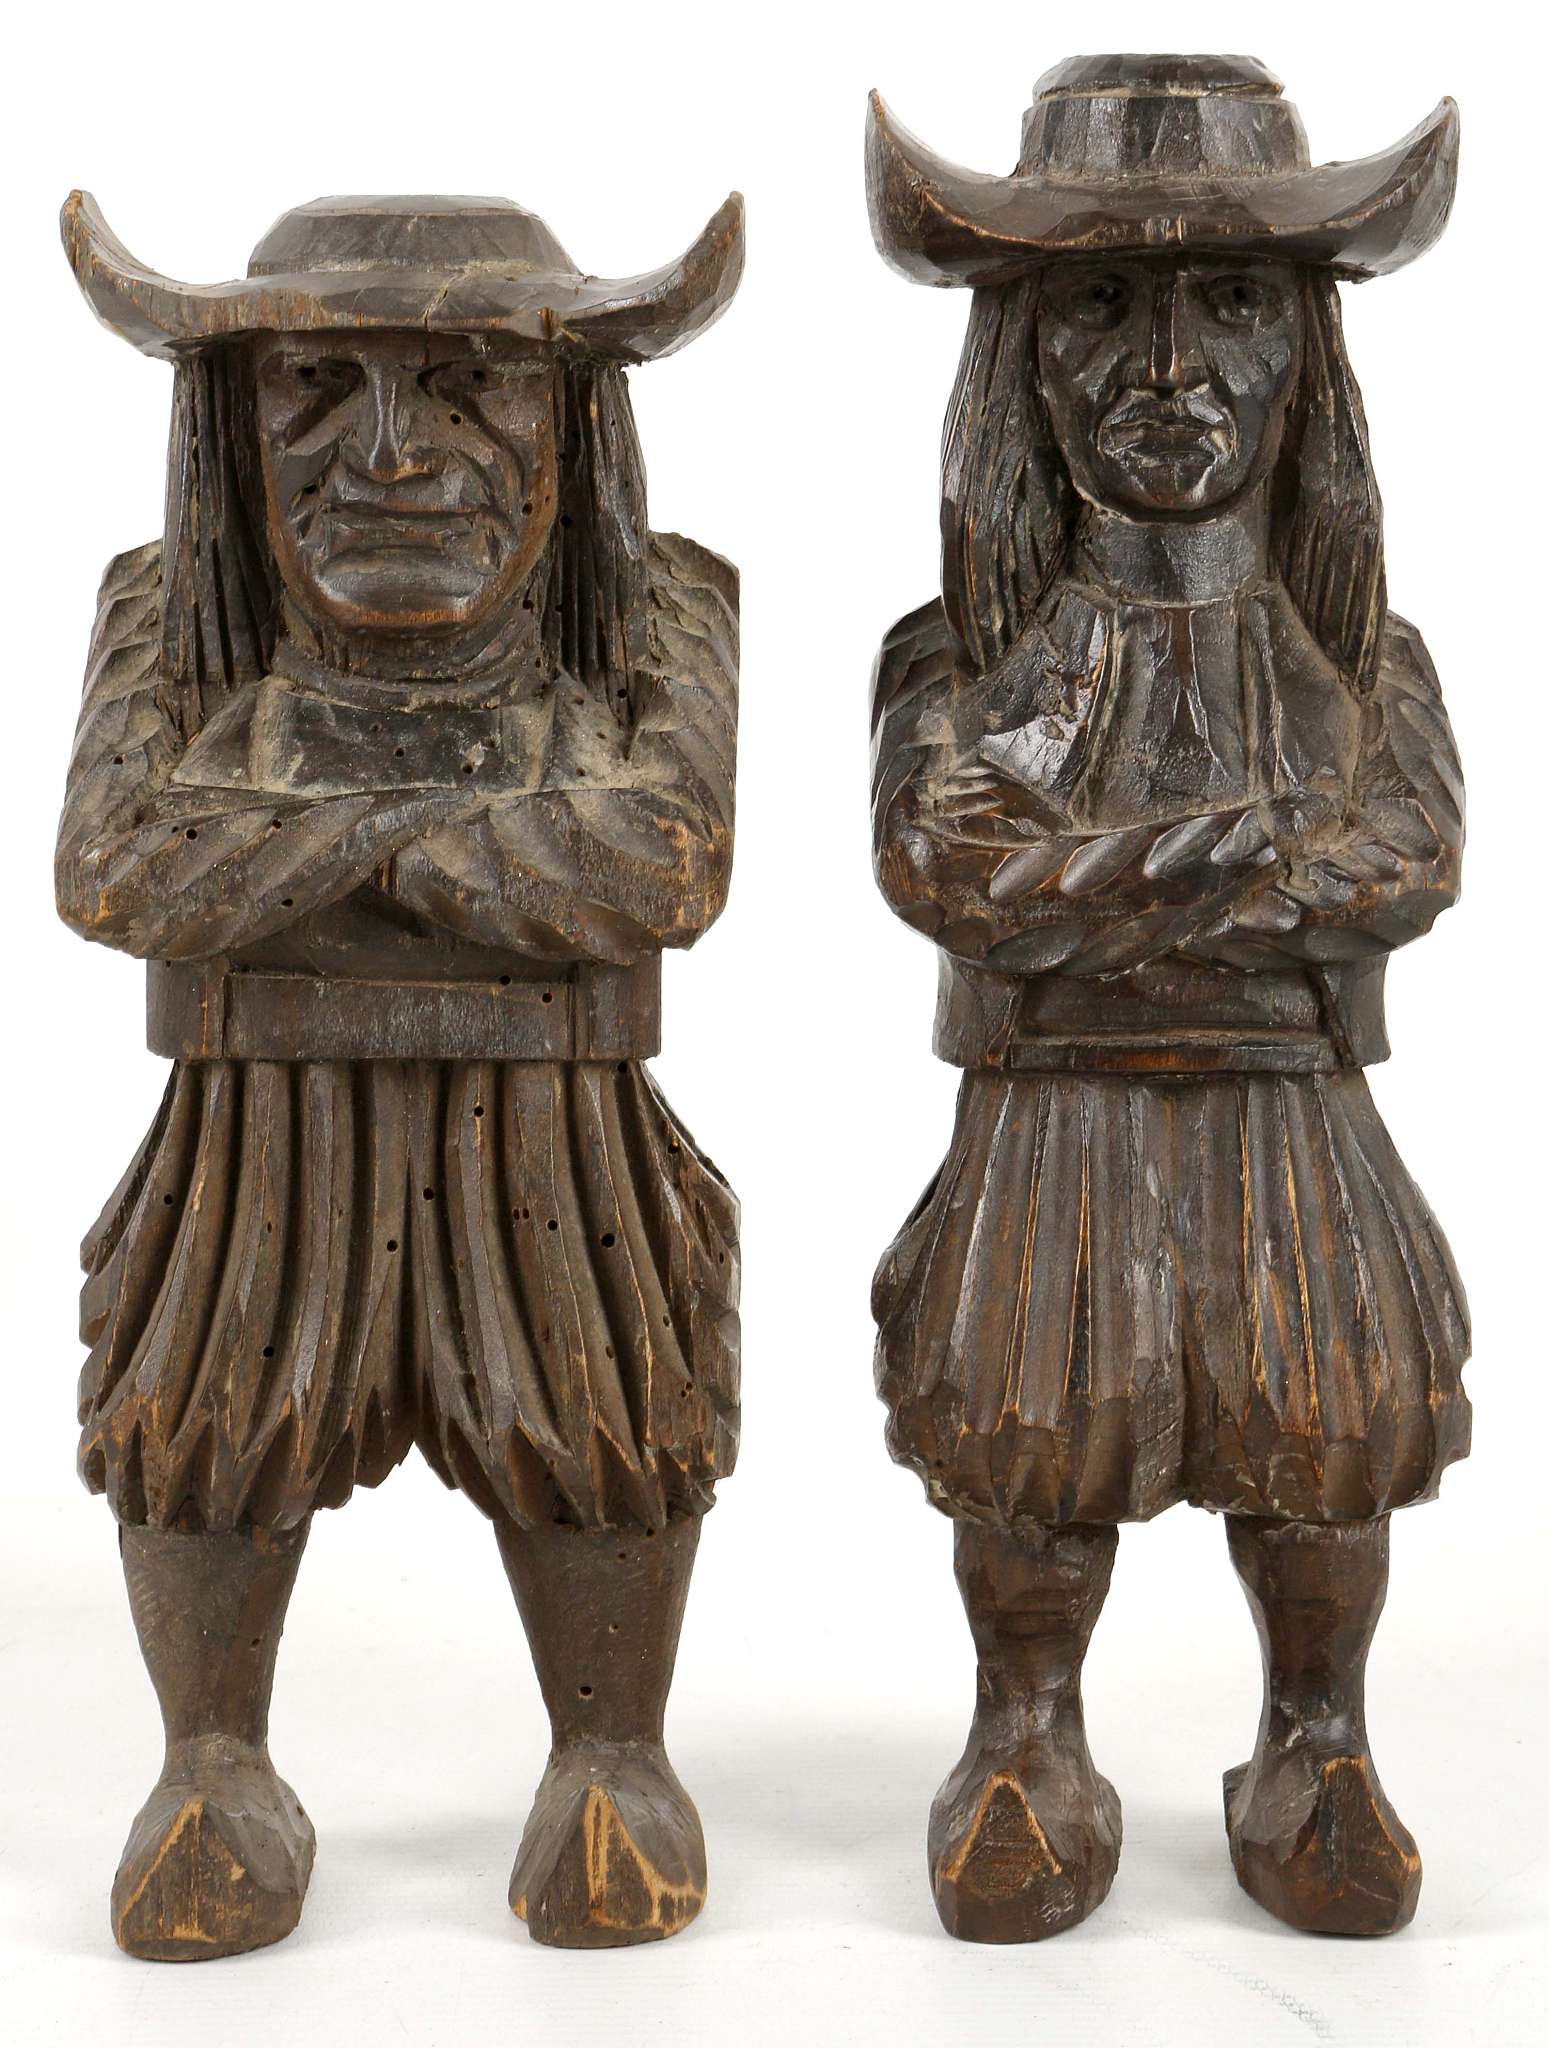 A pair of 19th century Black Forest style novelty